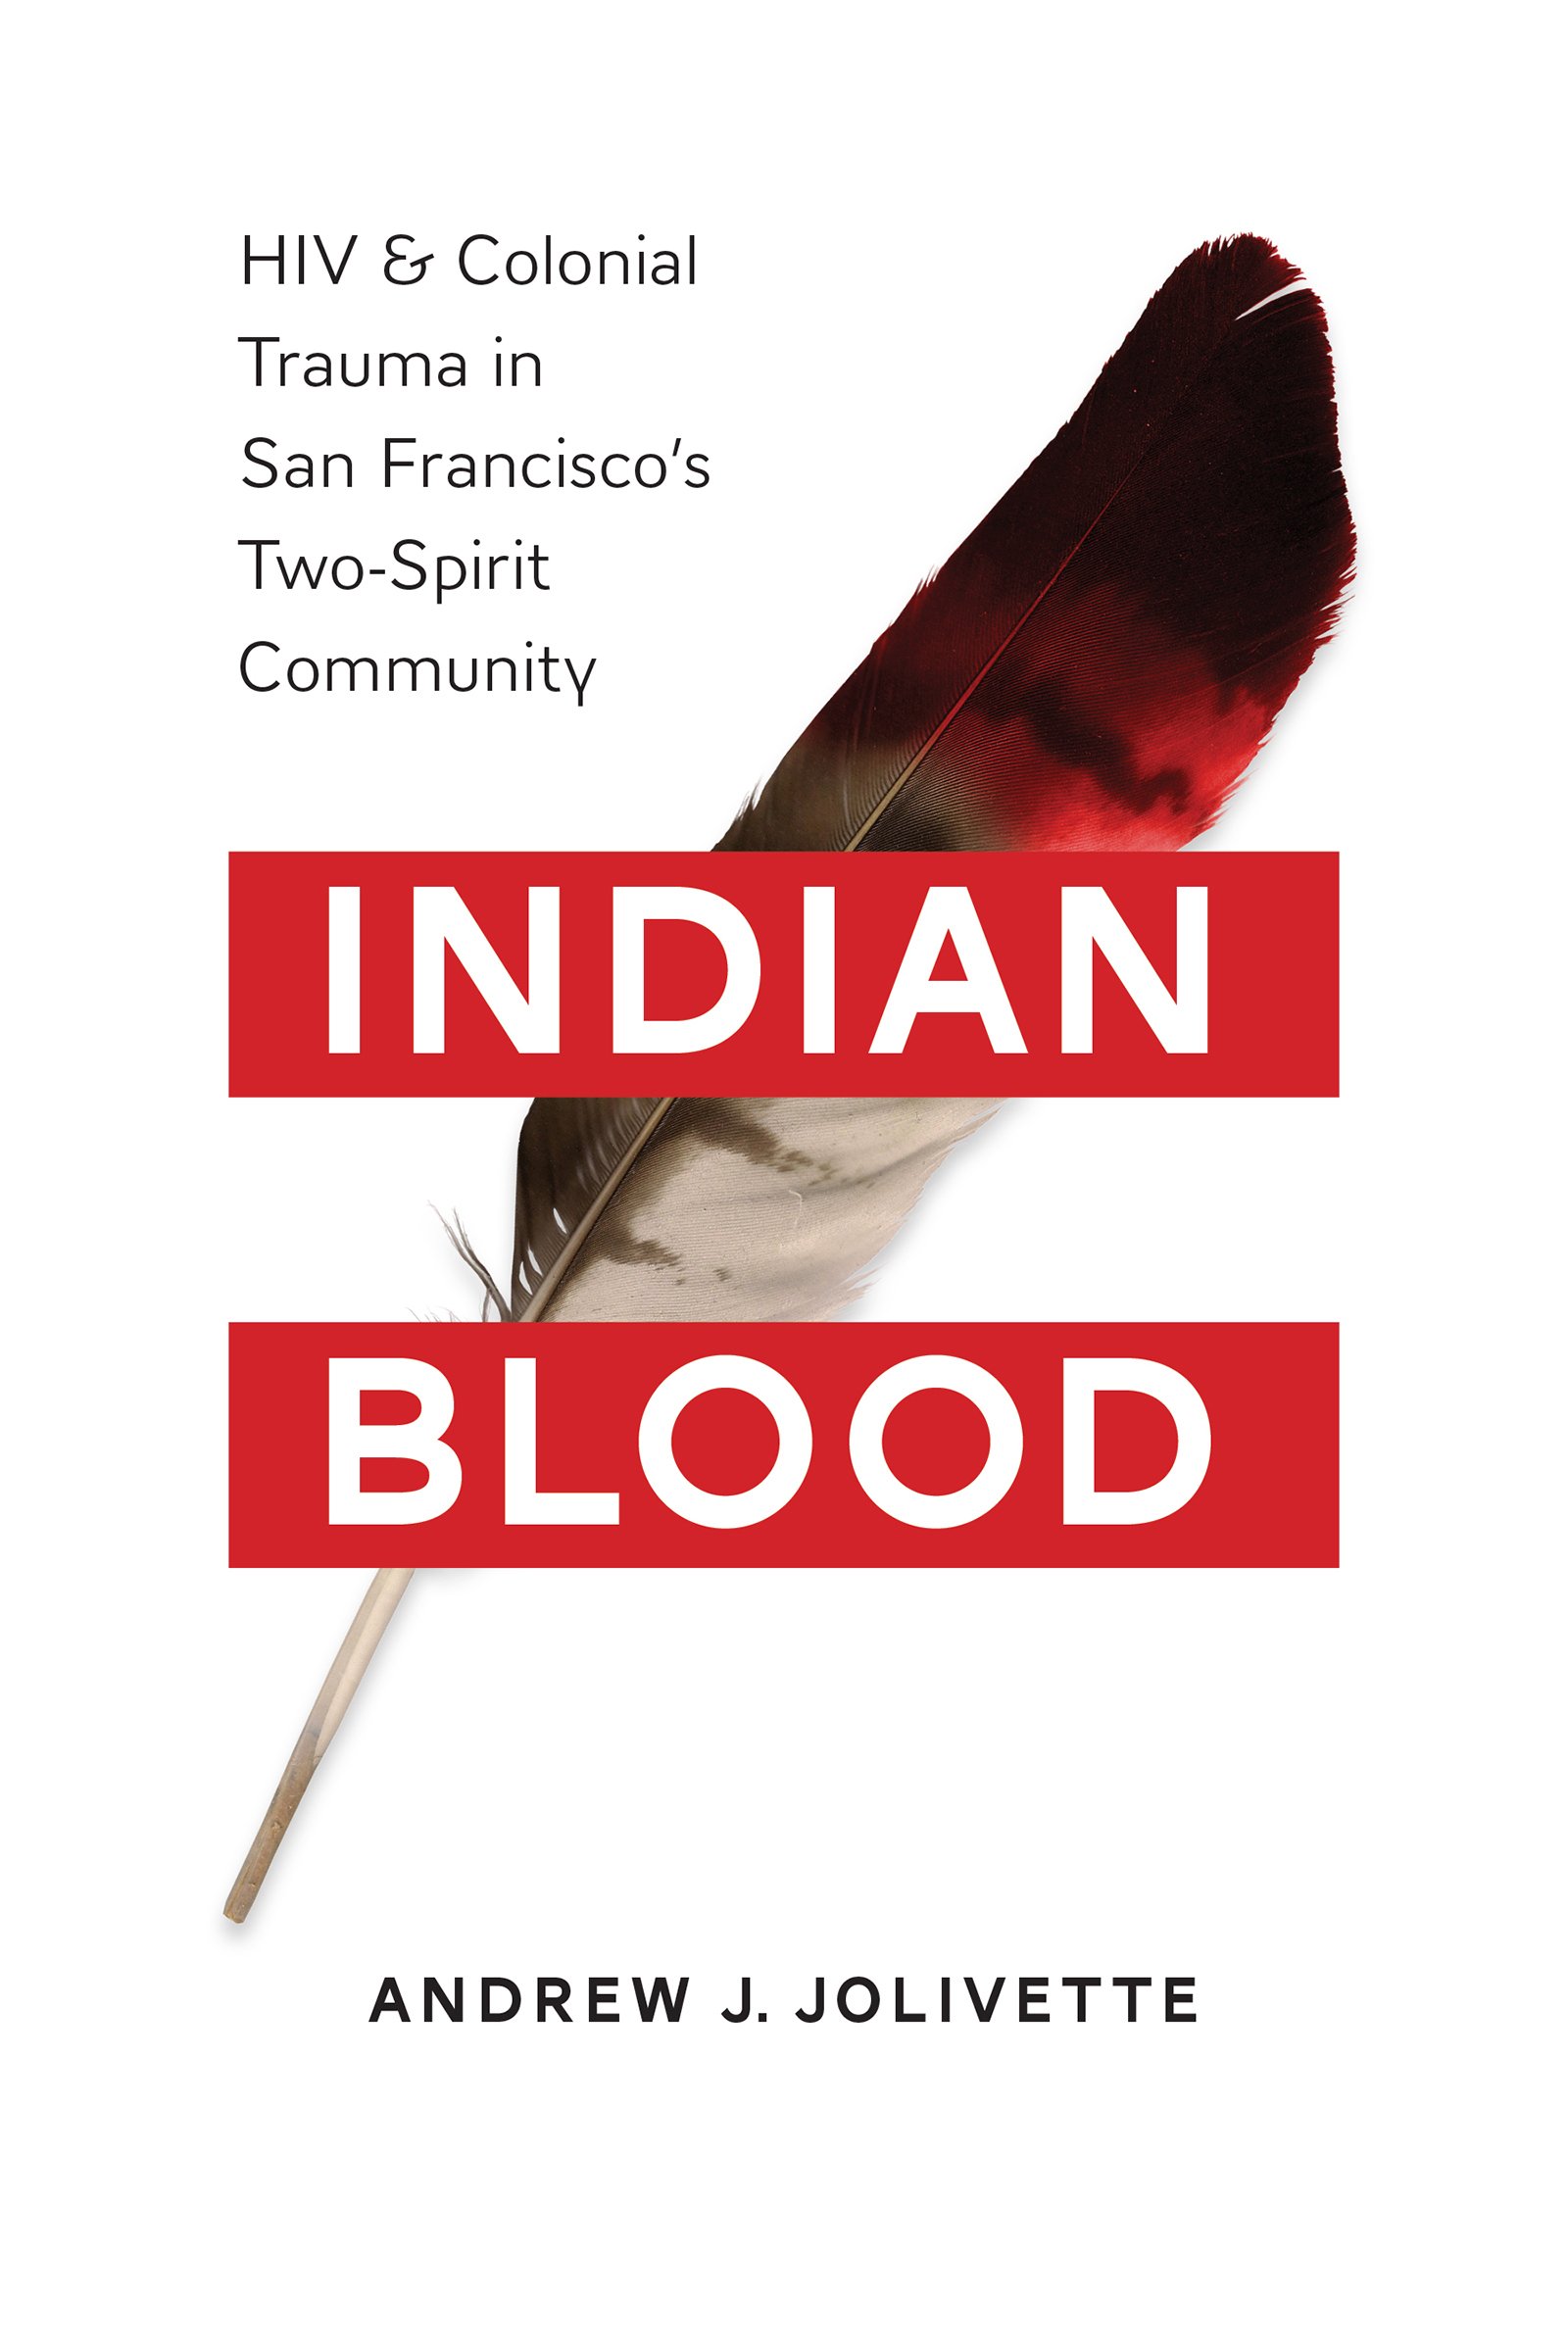 Andrew Jolivette book: Indian Blood: HIV and Colonial Trauma in San Francisco's Two-Spirit Community 